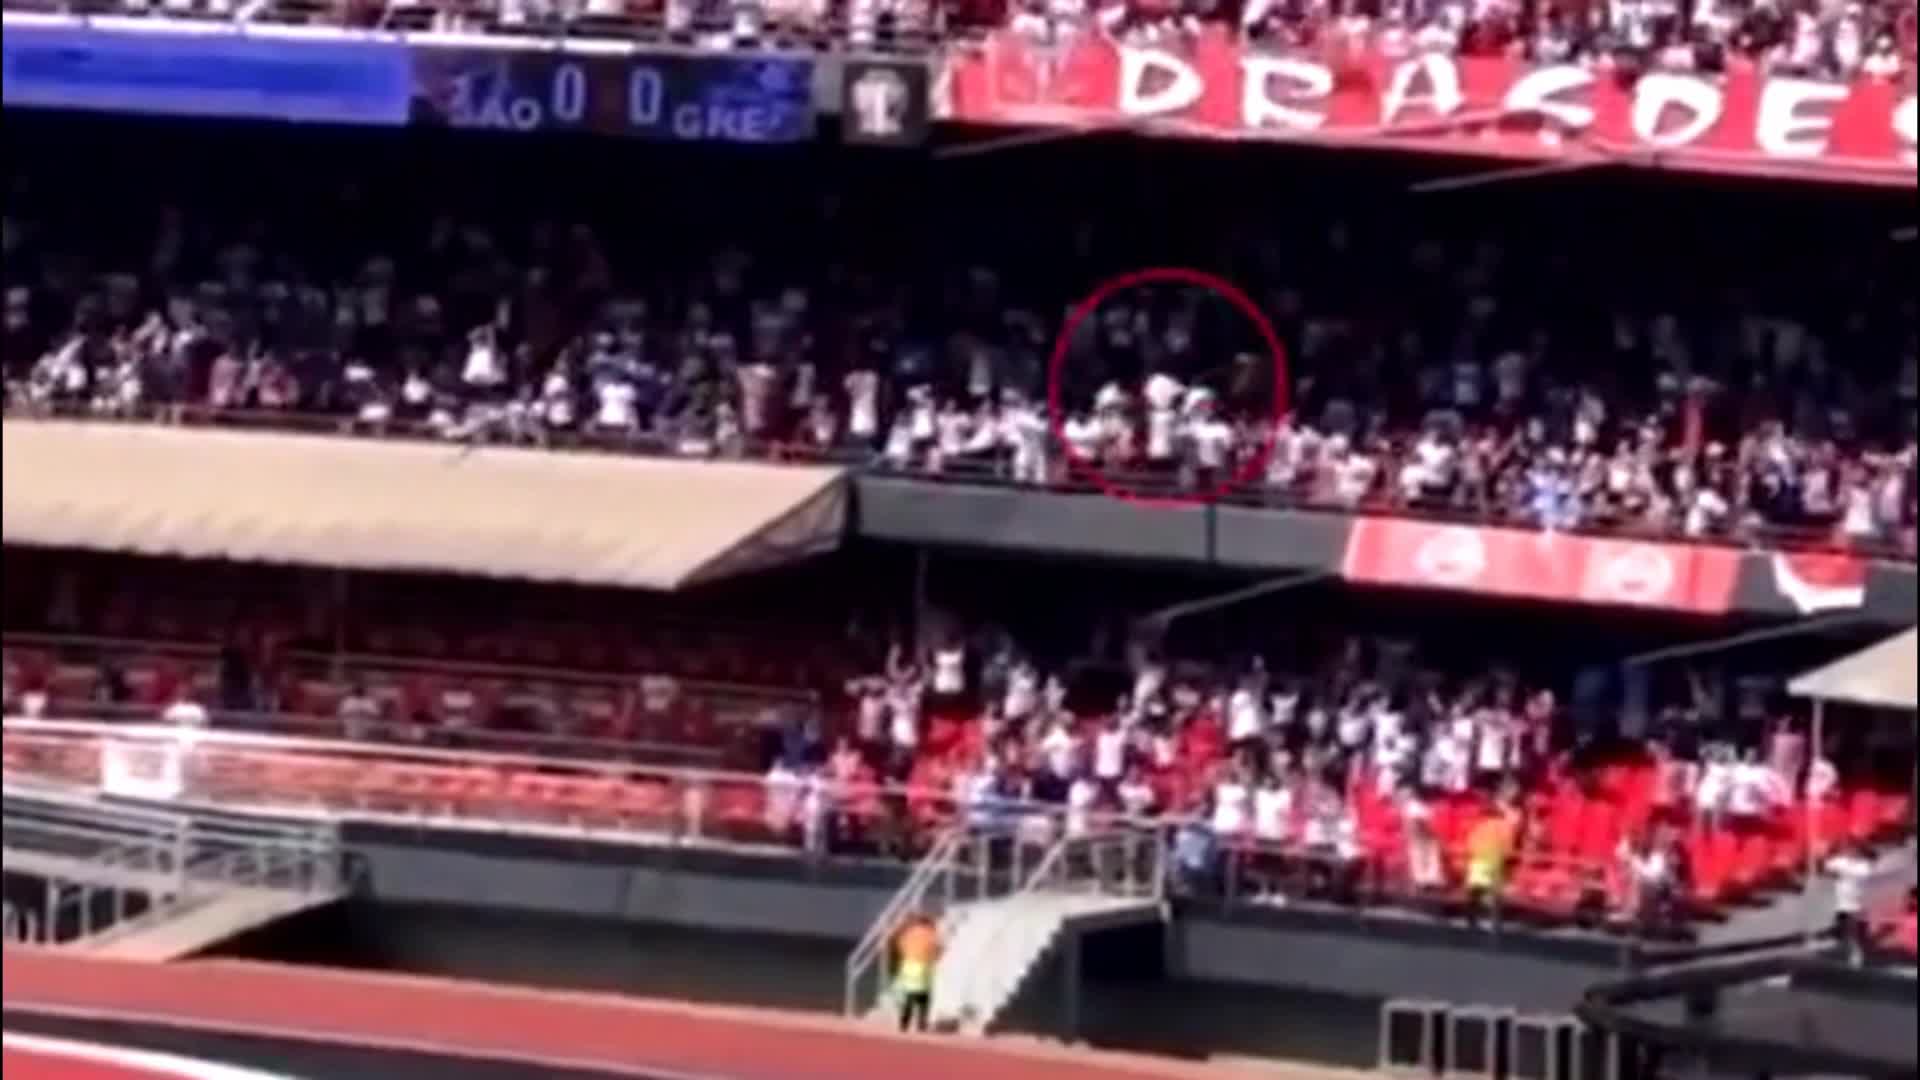 A Brazilian fan fell from the top bleacher and hit a girl. There was no problem for both.